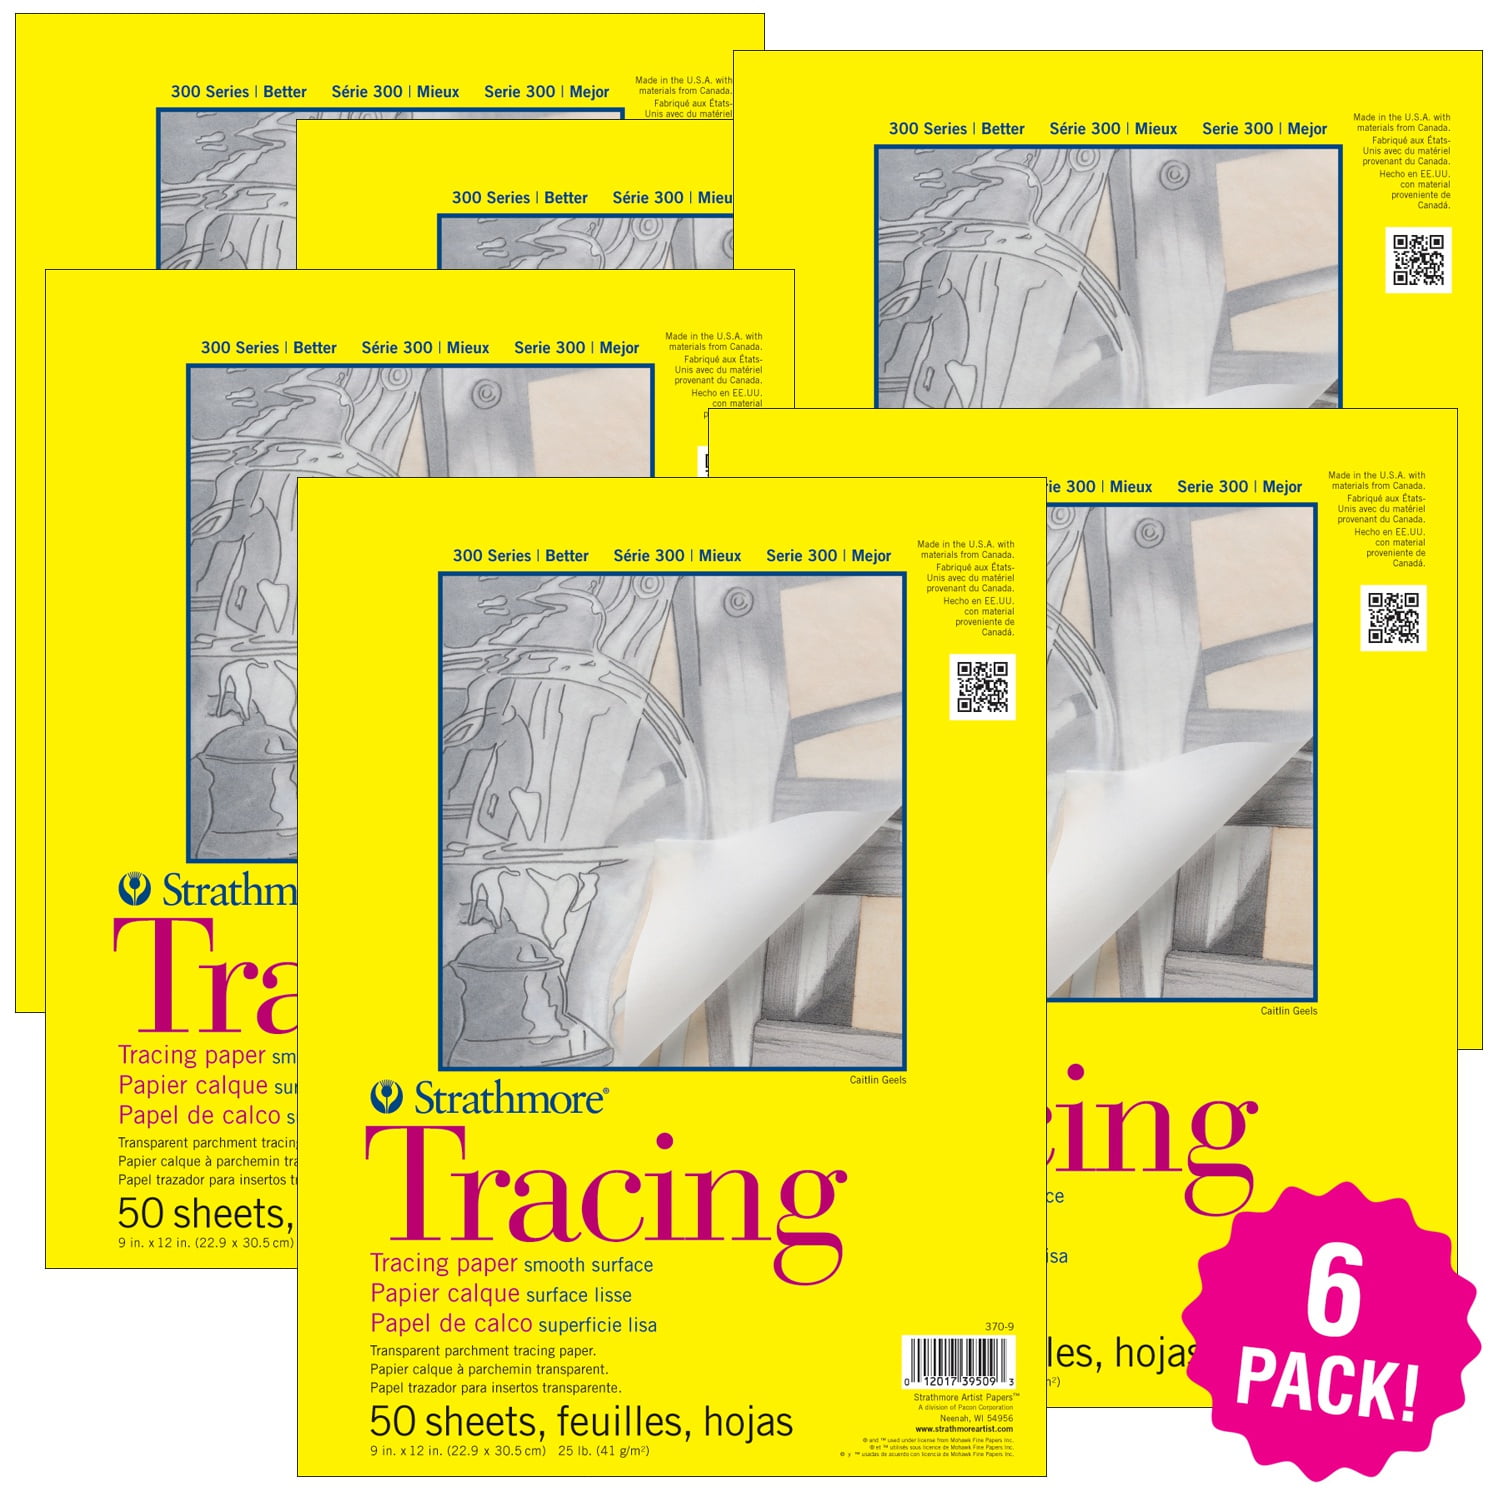 Strathmore Tracing Paper Pad 9X12 - 50 Sheets 956 is a great